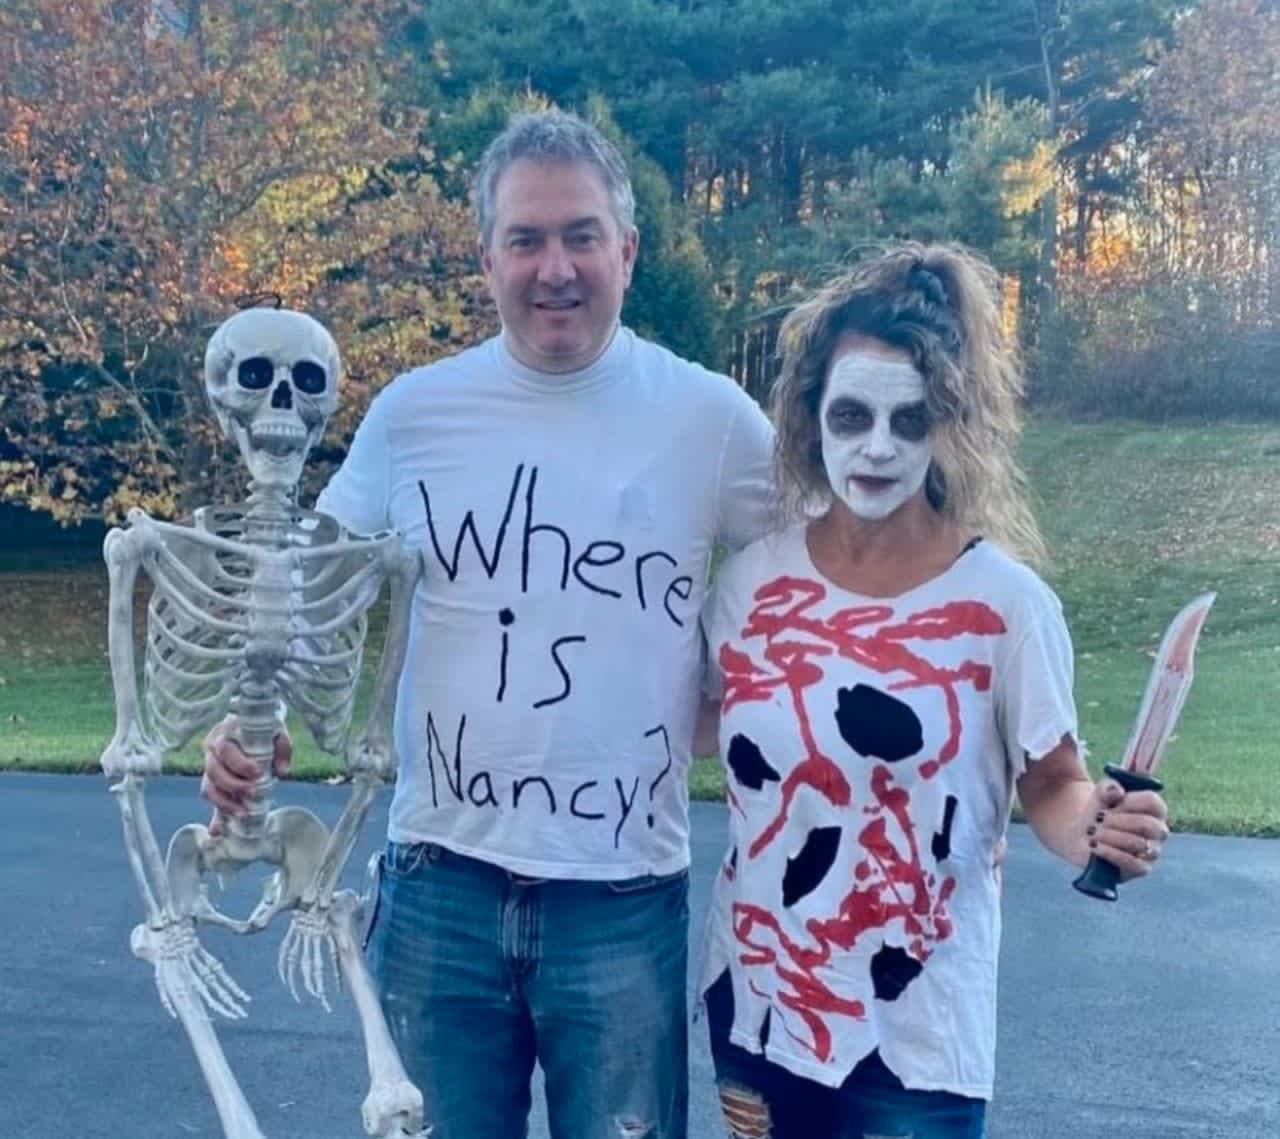 Tom Gregor, a Hunterdon County school board candidate who is running unopposed appeared on Twitter with his Halloween costume — a shirt that said, “where is Nancy?” accompanied by a skeleton and his wife in a zombie suit.